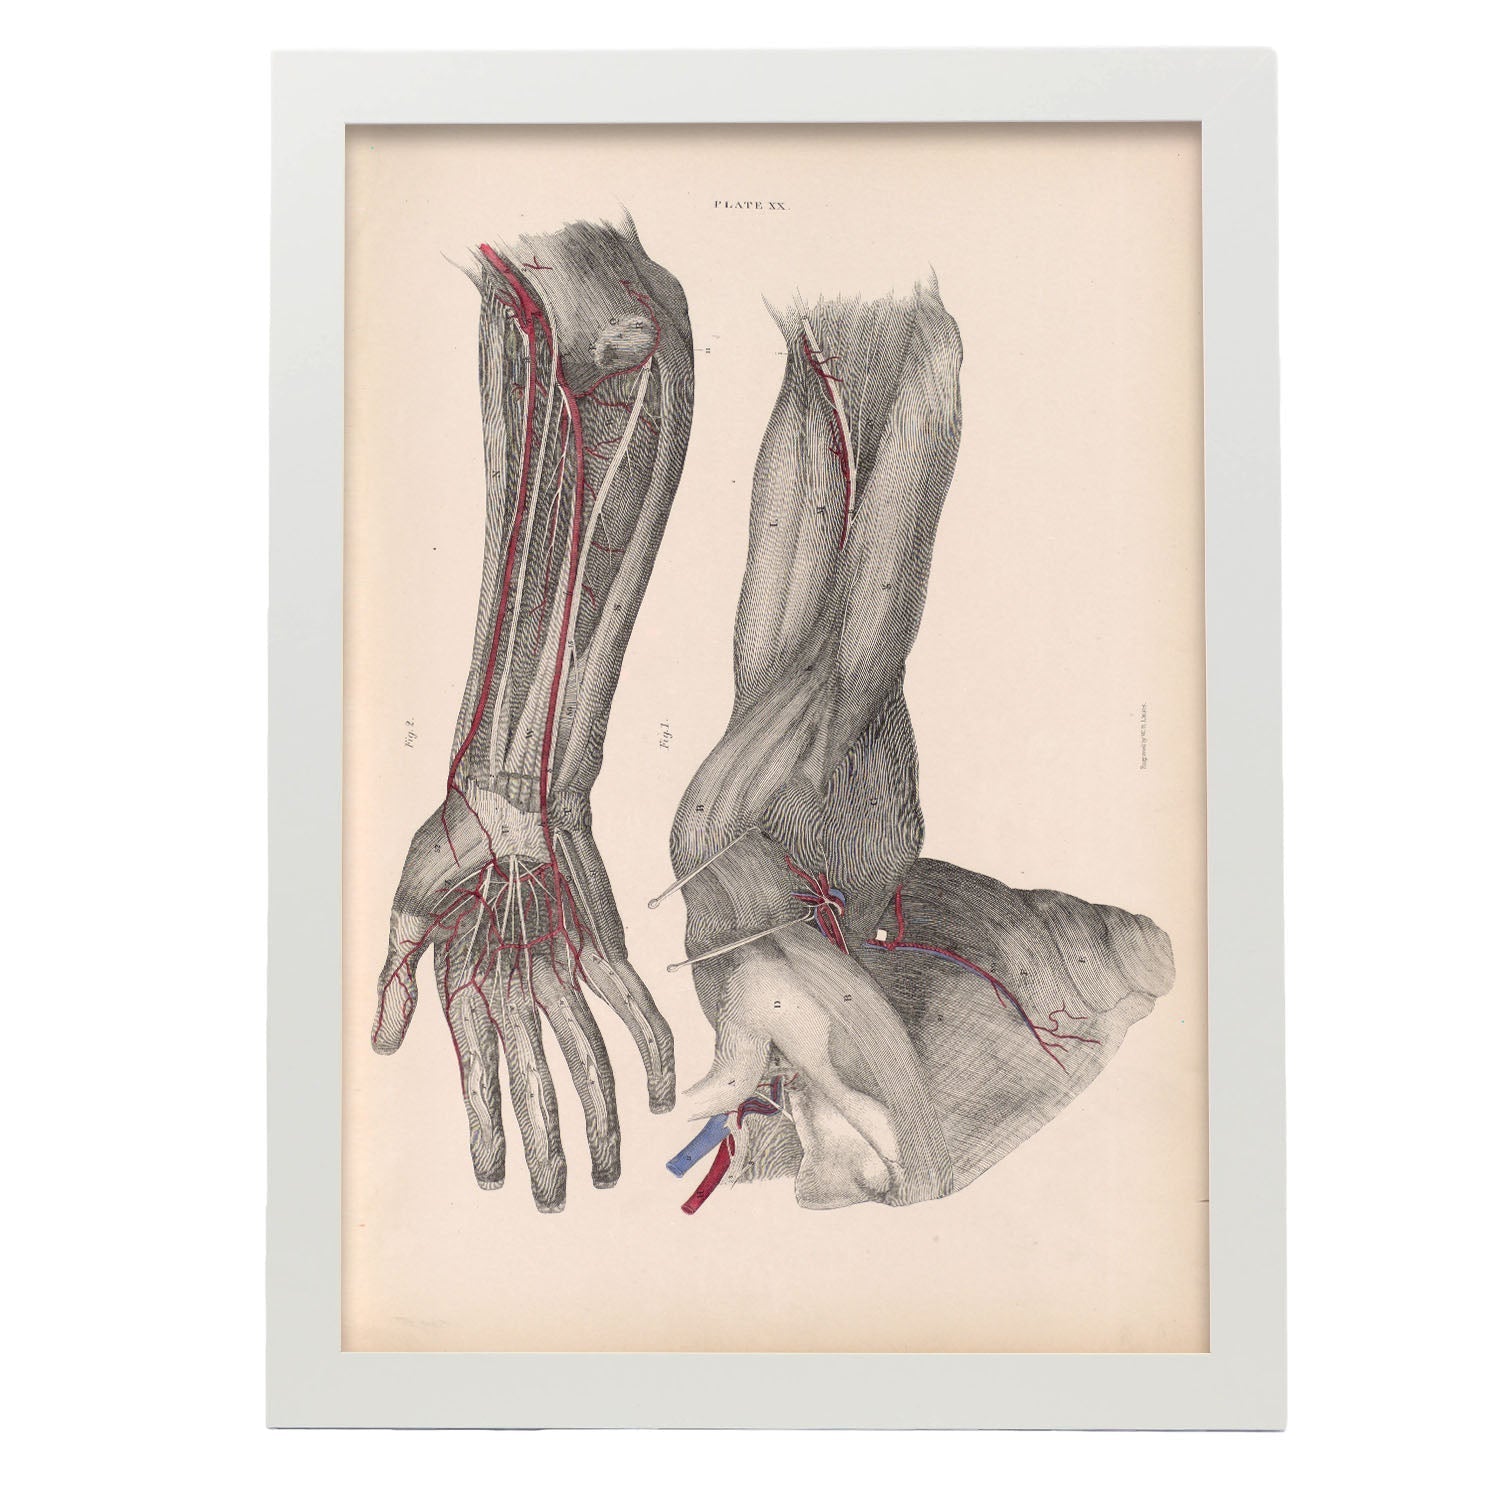 Dissection of the arm and hand-Artwork-Nacnic-A3-Marco Blanco-Nacnic Estudio SL